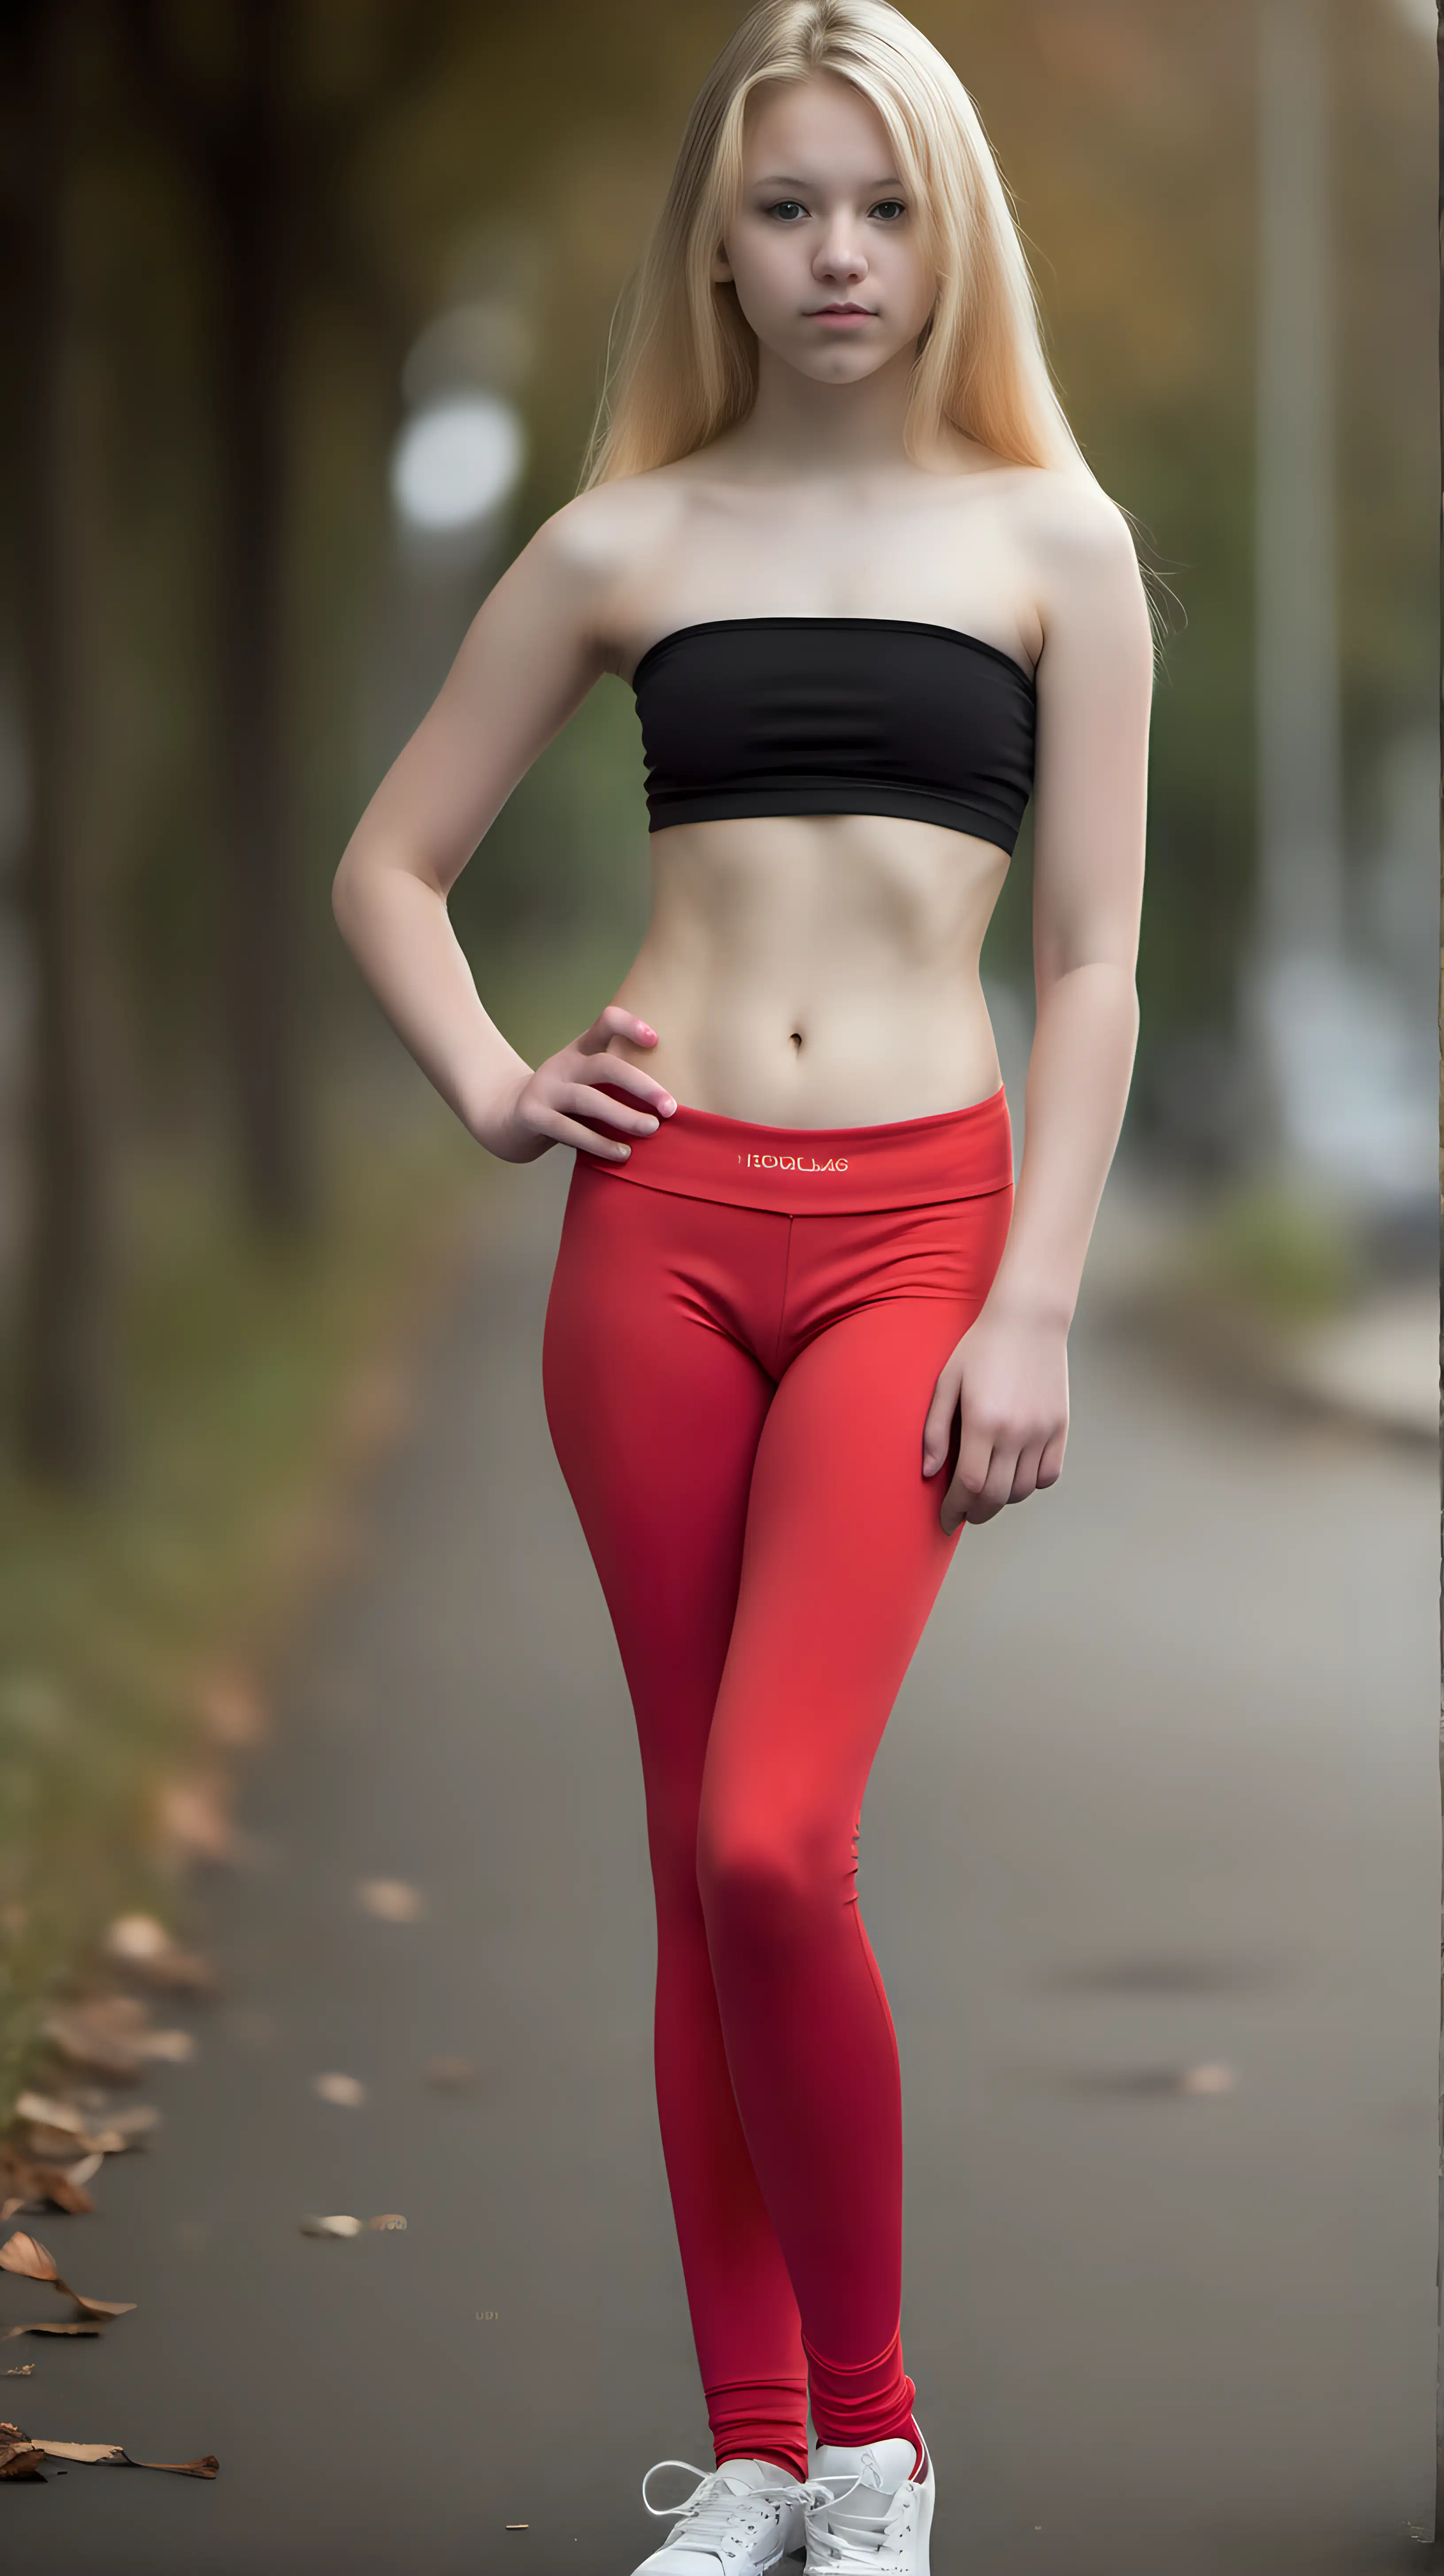 Teenage Girl Posing with Red Leggings and Blond Hair